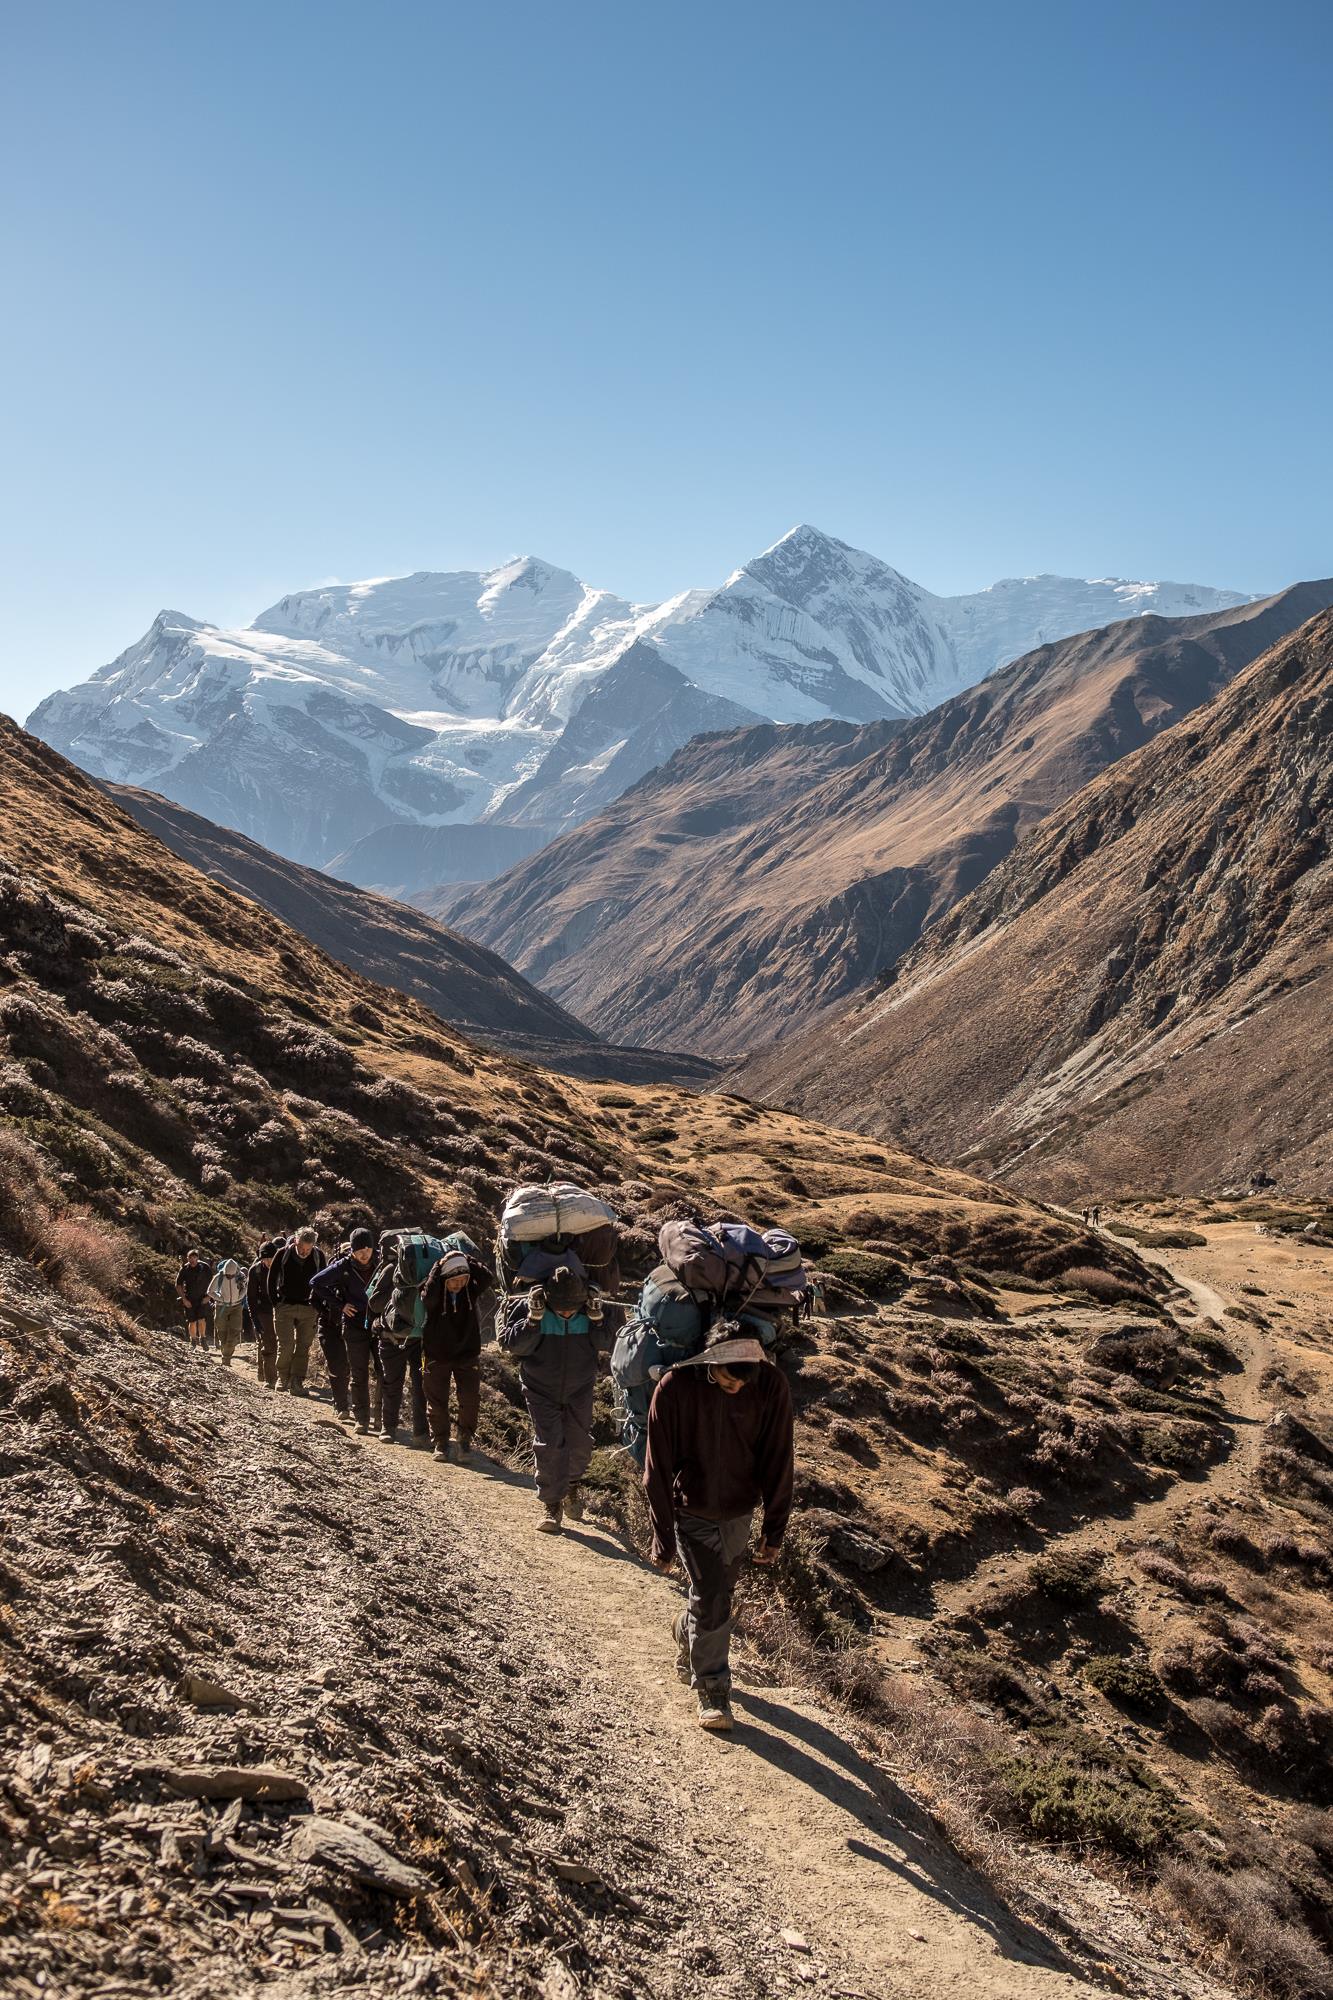 Despite carrying heavy loads, I noticed porters always hike in front of their group and arrive earlier to their destination at the end of the day.